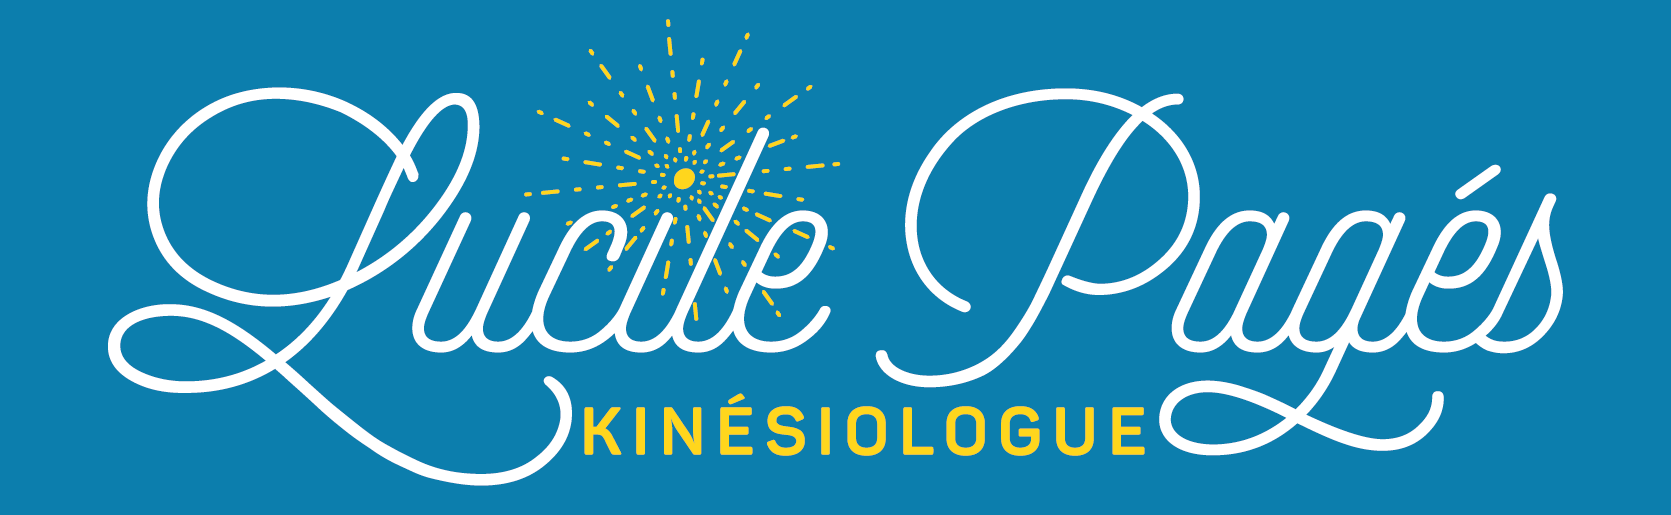 Lucile Pages – Kinésiologie - Bayonne, Anglet, Biarritz, Pays Basque